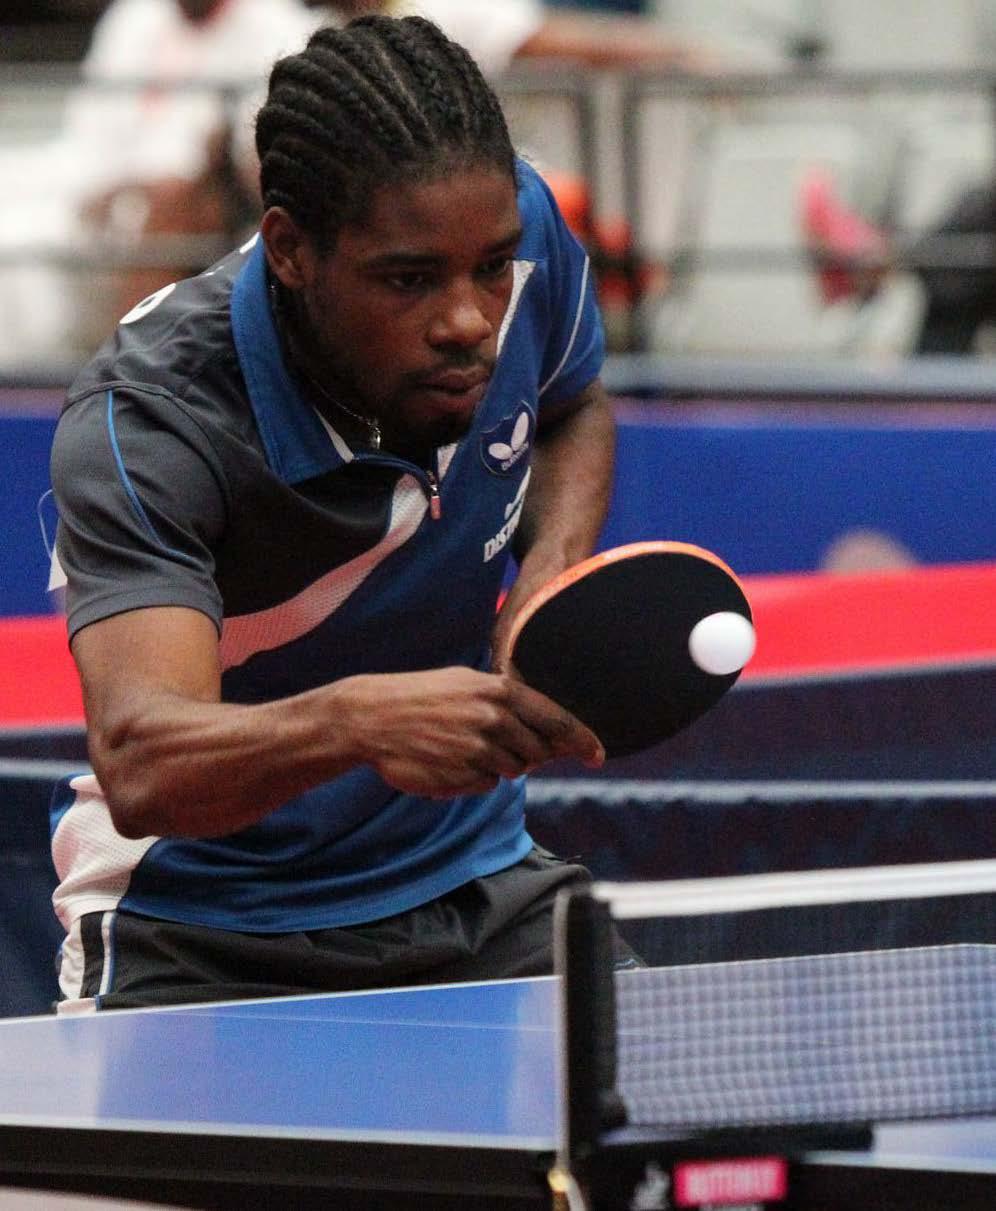 ITTF-Africa Olympic Qualification Tournament ITTF-Africa Olympic Qualification Tournament The ITTF-Africa Olympic Qualification Tournament sees athletes from African countries striving to